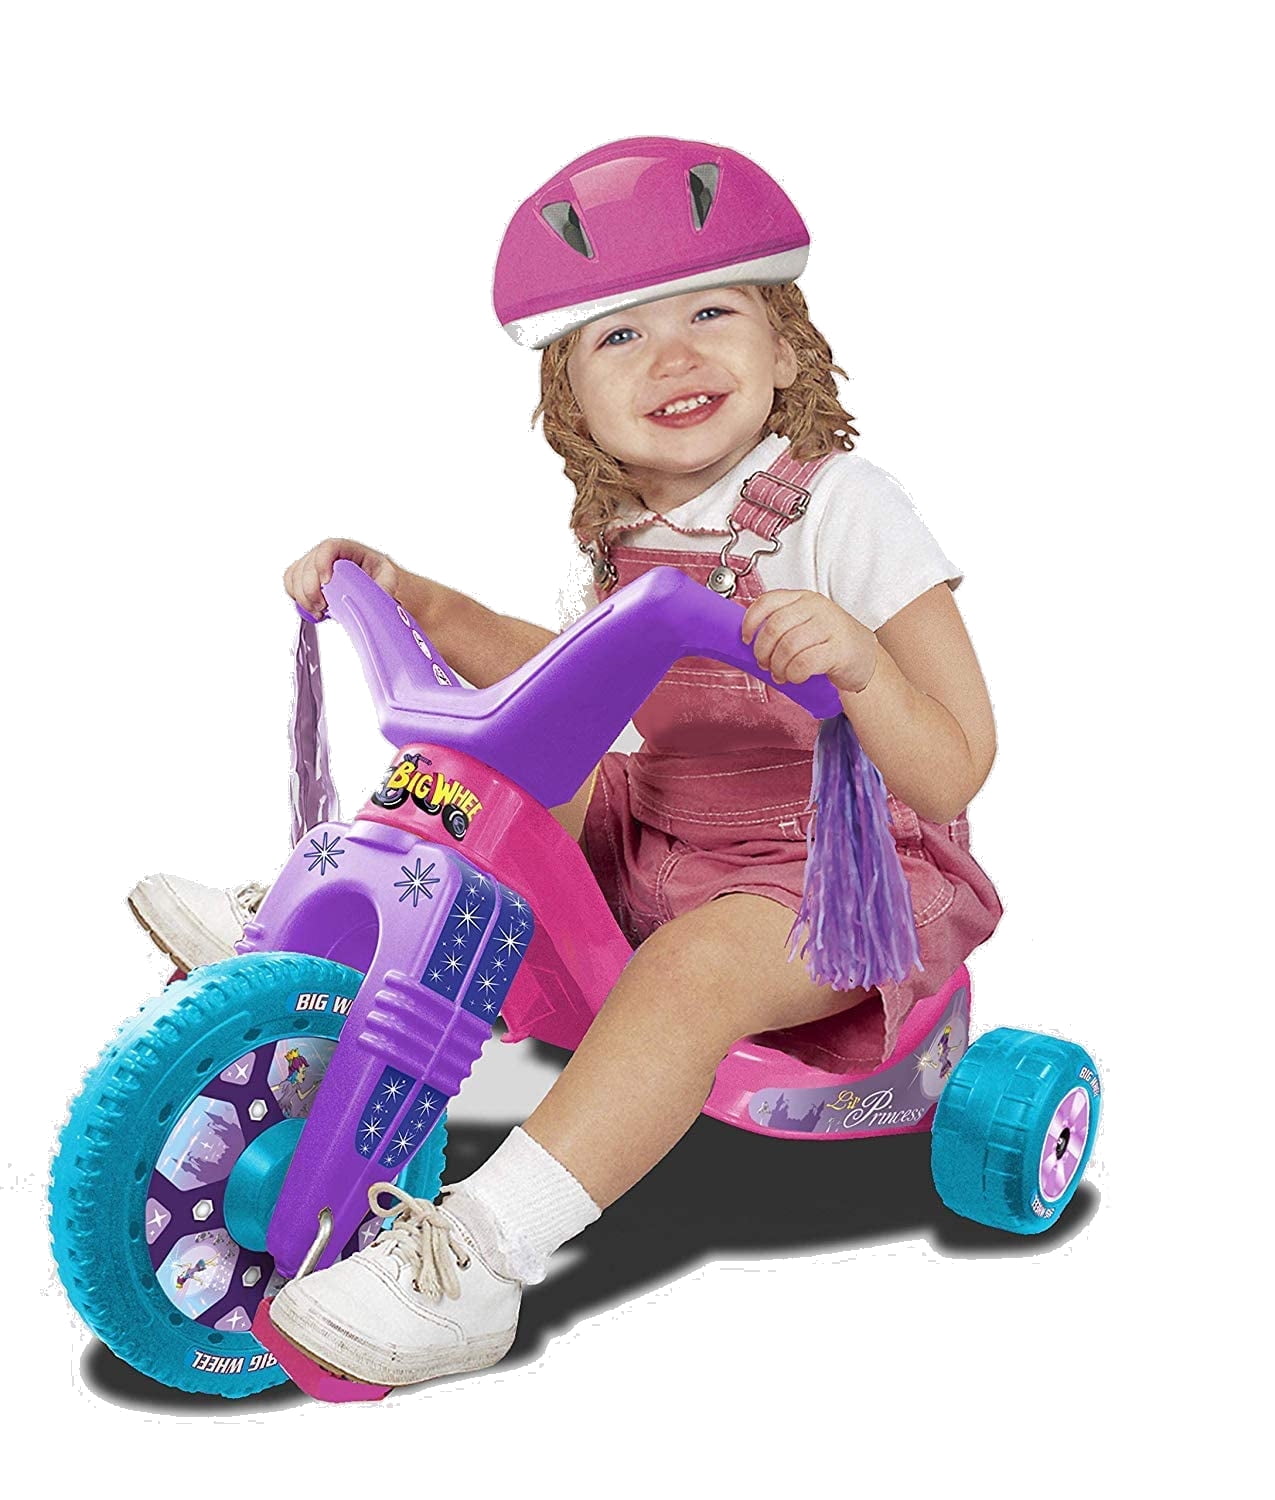 The Original Big Wheel Army Edition Junior Trike for Boys and Girls Cruiser Ride-on Toy 8.5 Inch Durable Wheel Indoor/Outdoor Toys Big Toy Tricycle for Toddlers 